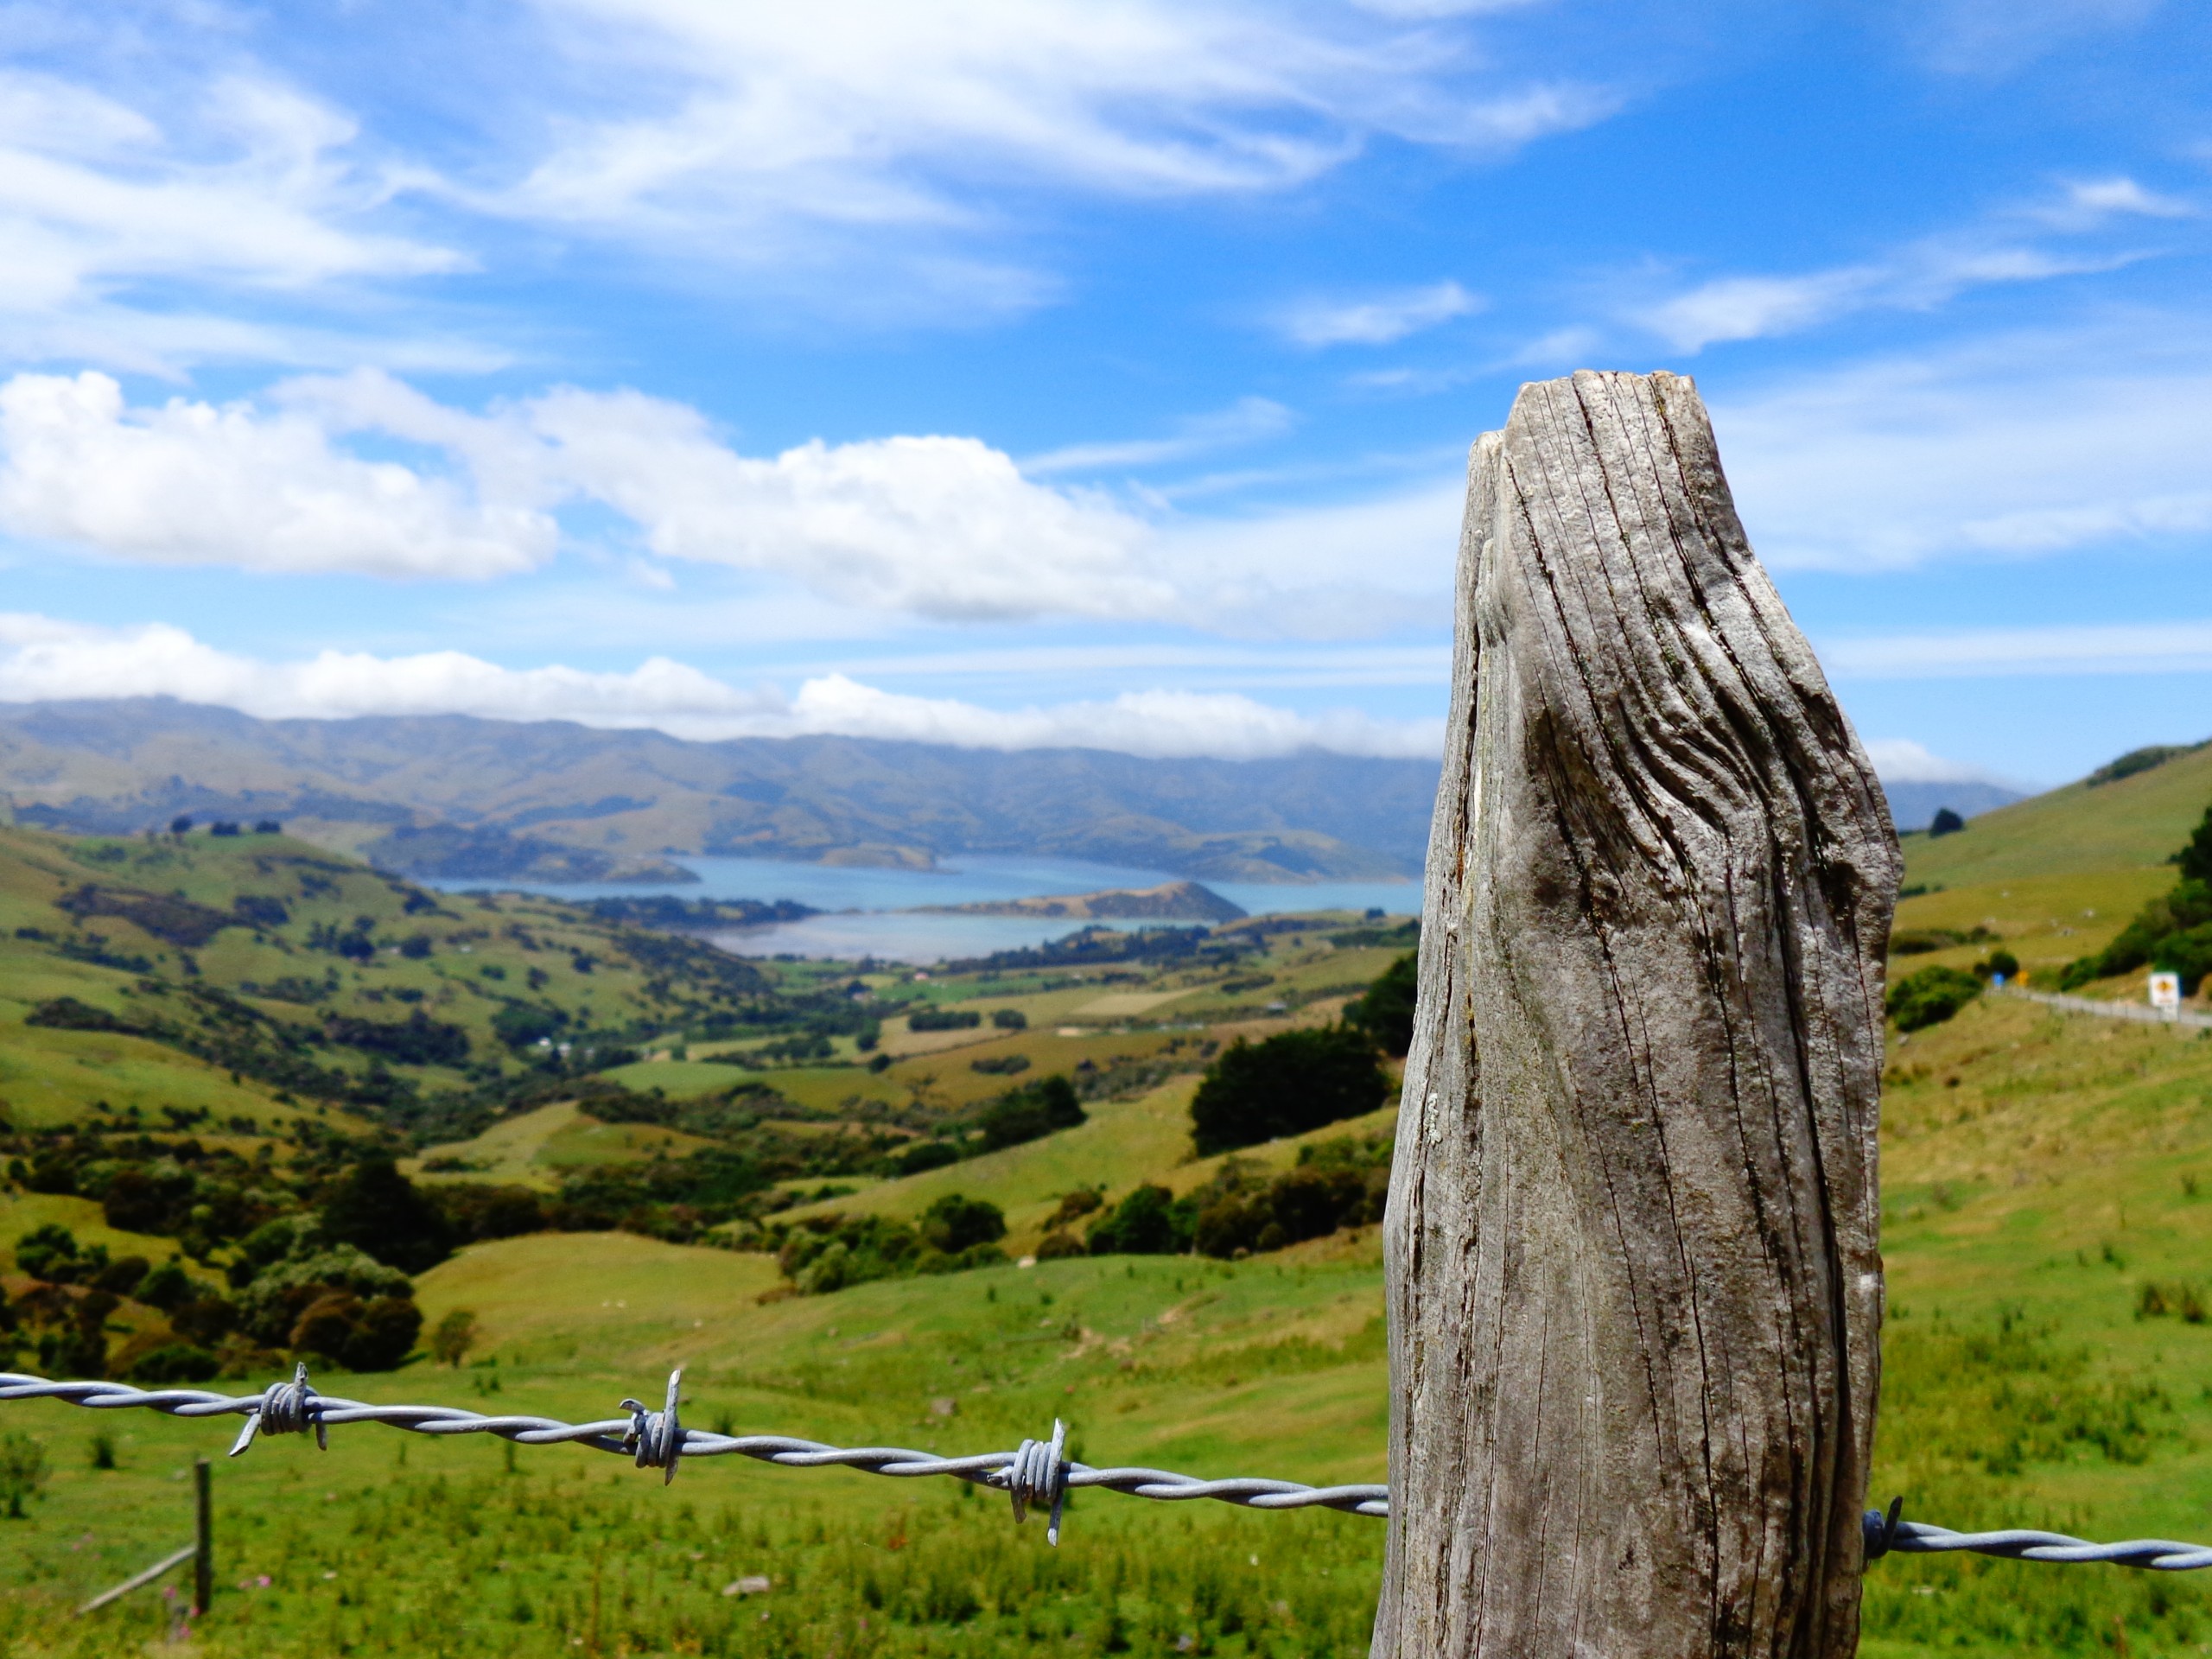 Shelby Hasse took first place in the Natural Landscapes & Seascapes category for this scenic shot taken near Akaroa, New Zealand.